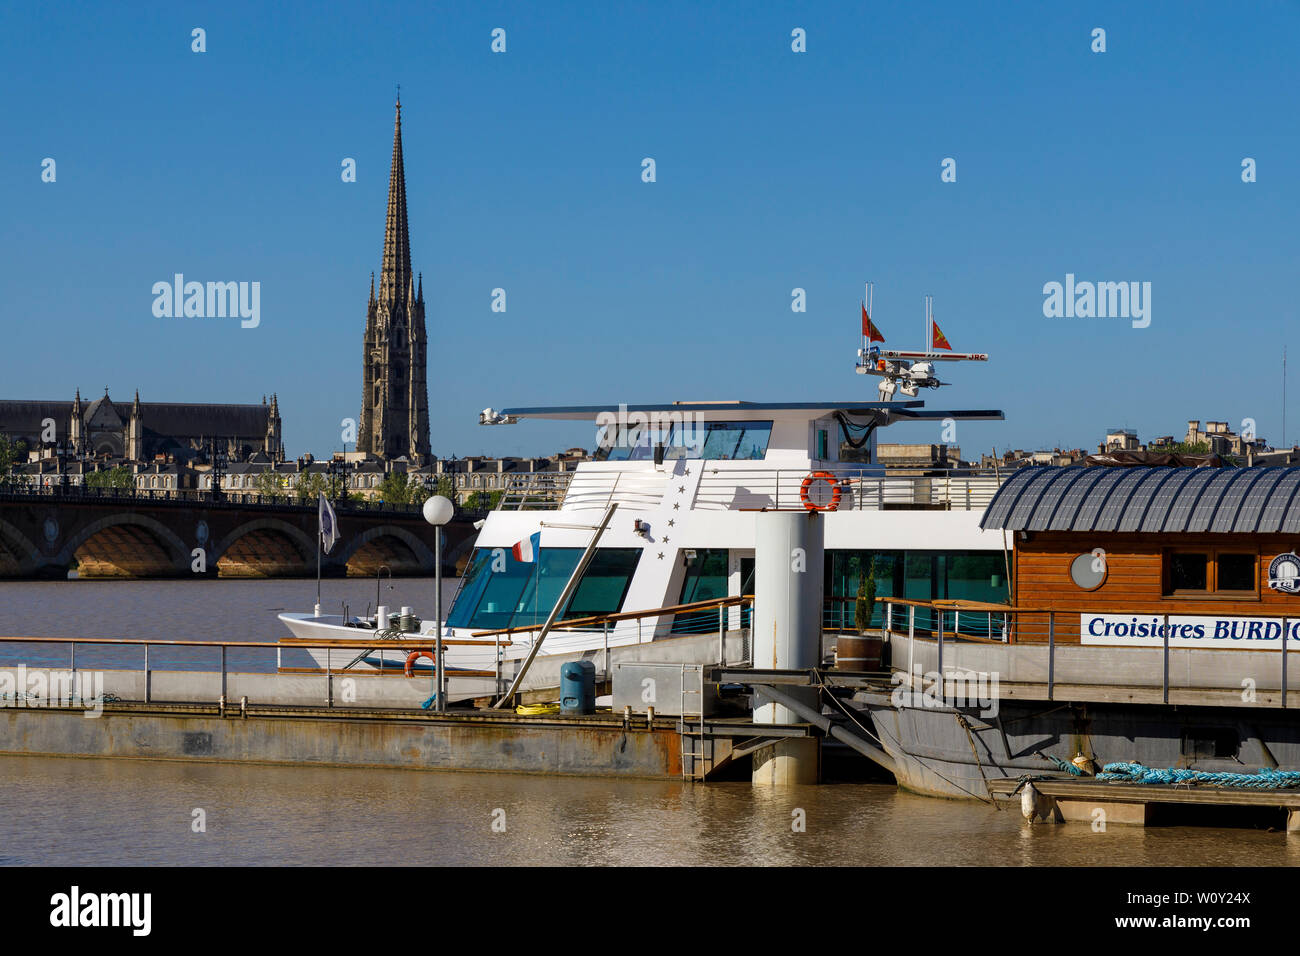 Pontoon dock and mooring jetty on the Garonne River in Bordeaux, Gironde, France. Stock Photo